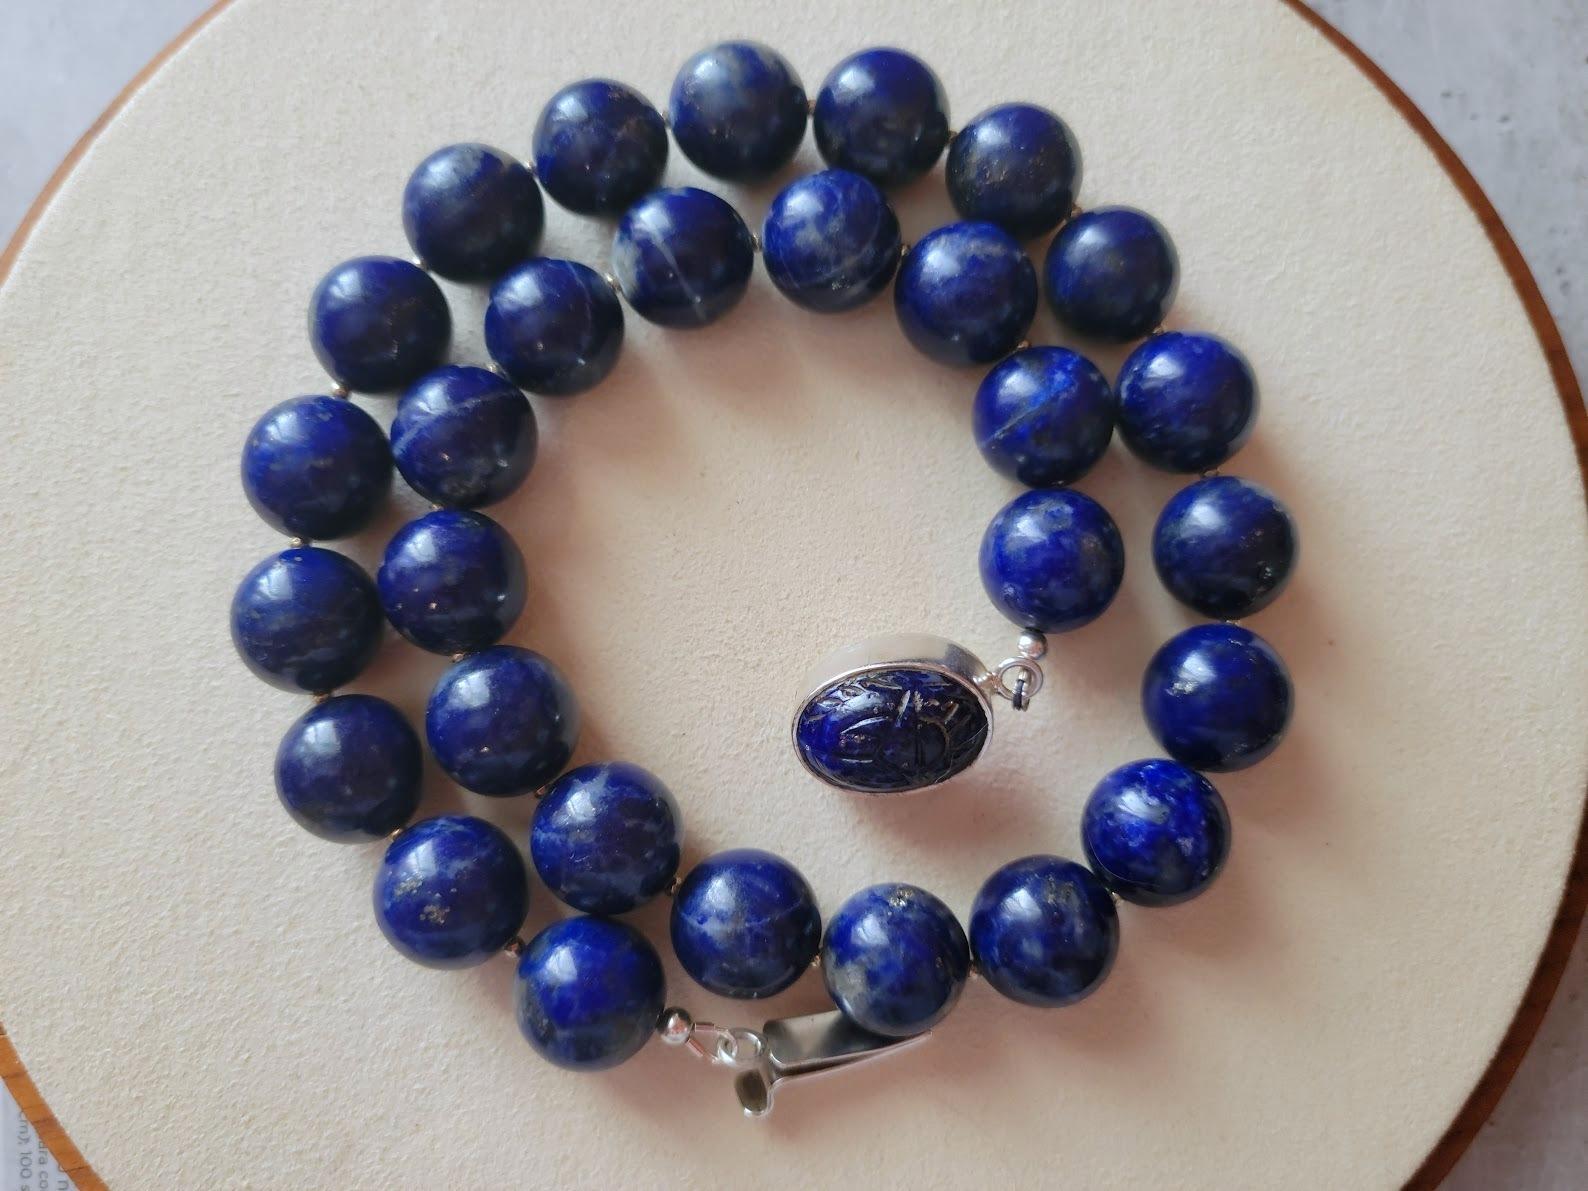 The length of the necklace is 18.5 inches (47 cm). The size of the smooth round beads is 14 mm.
The lapis lazuli beads are indigo, midnight tone, and highly saturated. Lapis lazuli has visible calcite and golden pyrite flecks.
Natural color, not